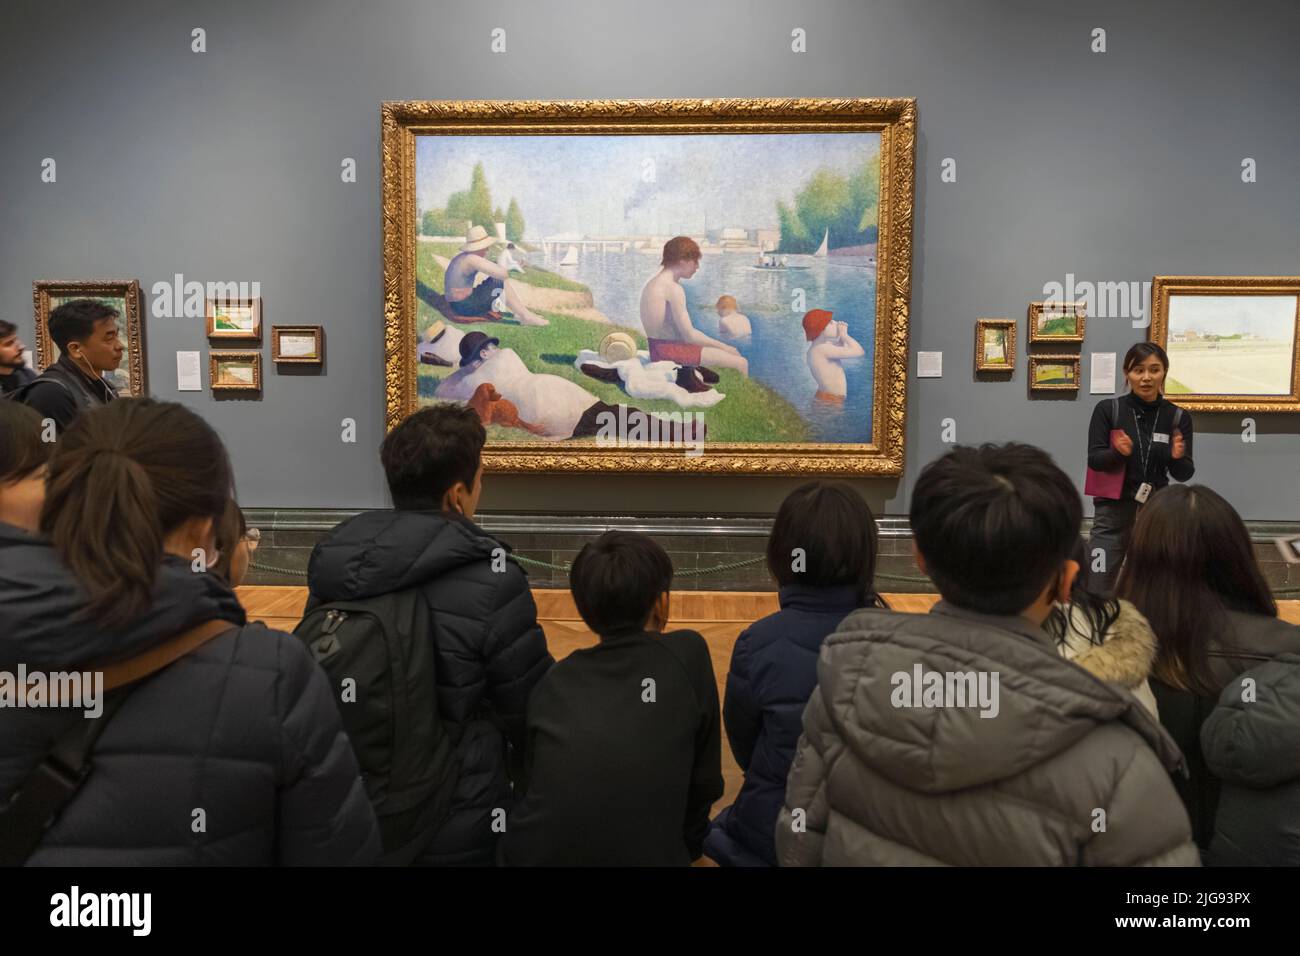 England, London, The National Gallery, Group of Asian School Children Looking at Artwork Stock Photo